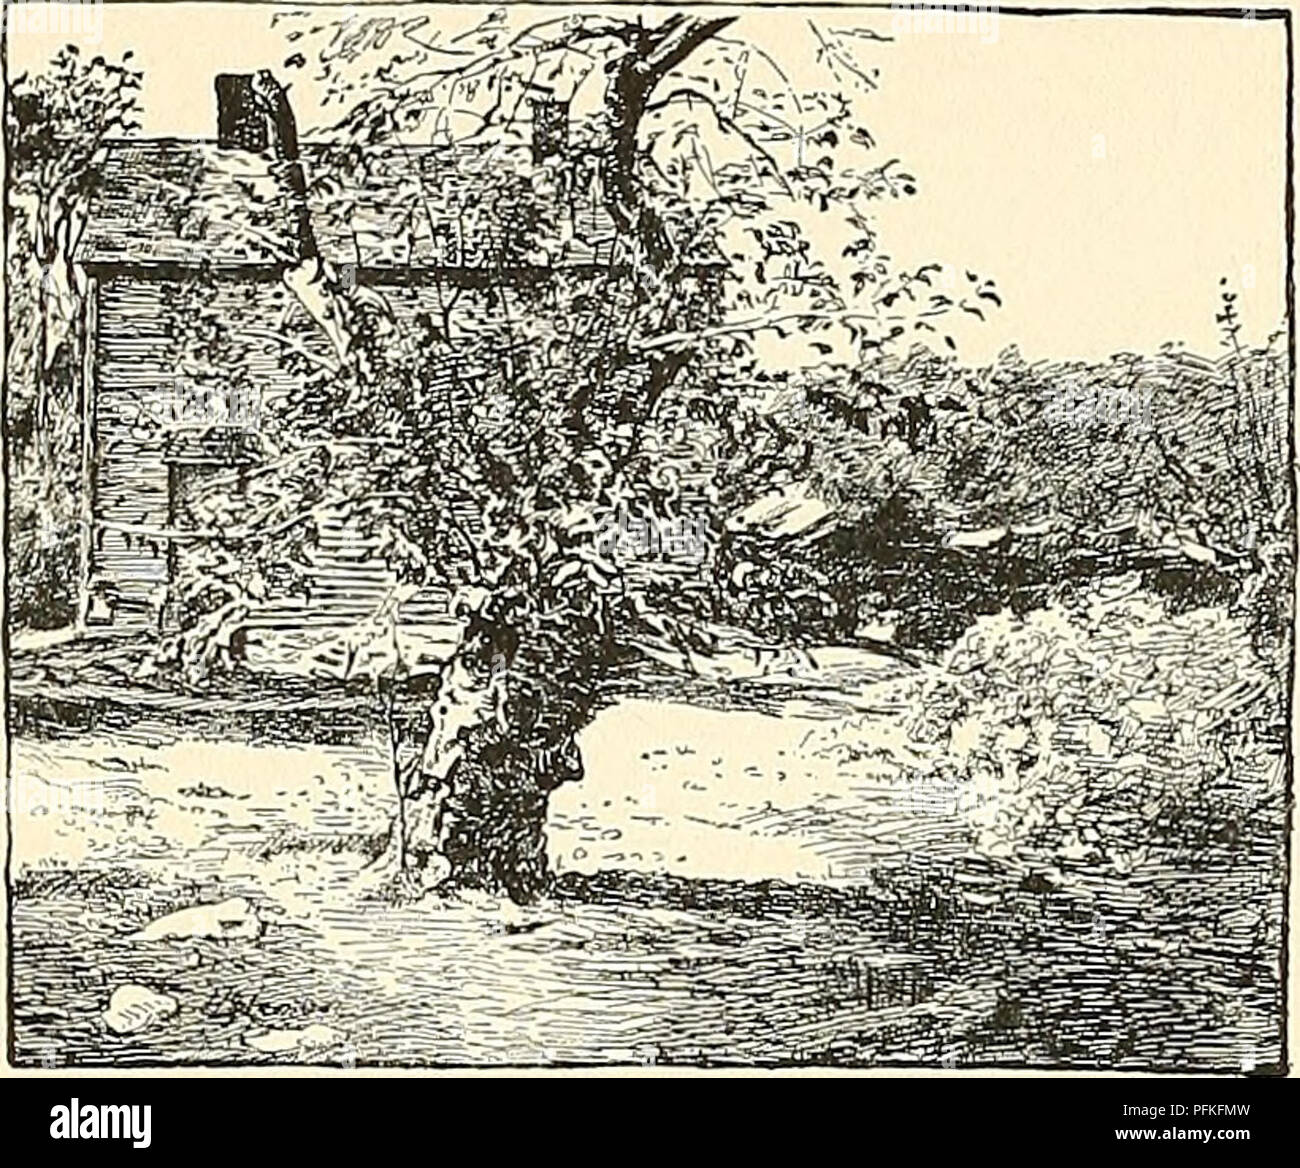 . Cyclopedia of American horticulture, comprising suggestions for cultivation of horticultural plants, descriptions of the species of fruits, vegetables, flowers, and ornamental plants sold in the United States and Canada, together with geographical and biographical sketches. Gardening. 1516 RHODE ISLAND RHODODENDRON. 2103 Original tree of Rhode Island Greening apple as It looked in 1900. Pears are found growing in abundance all over the state, nearly every village lot having a few trees of the more popular varieties. There are several small com- mercial orchards, the principal varieties produ Stock Photo